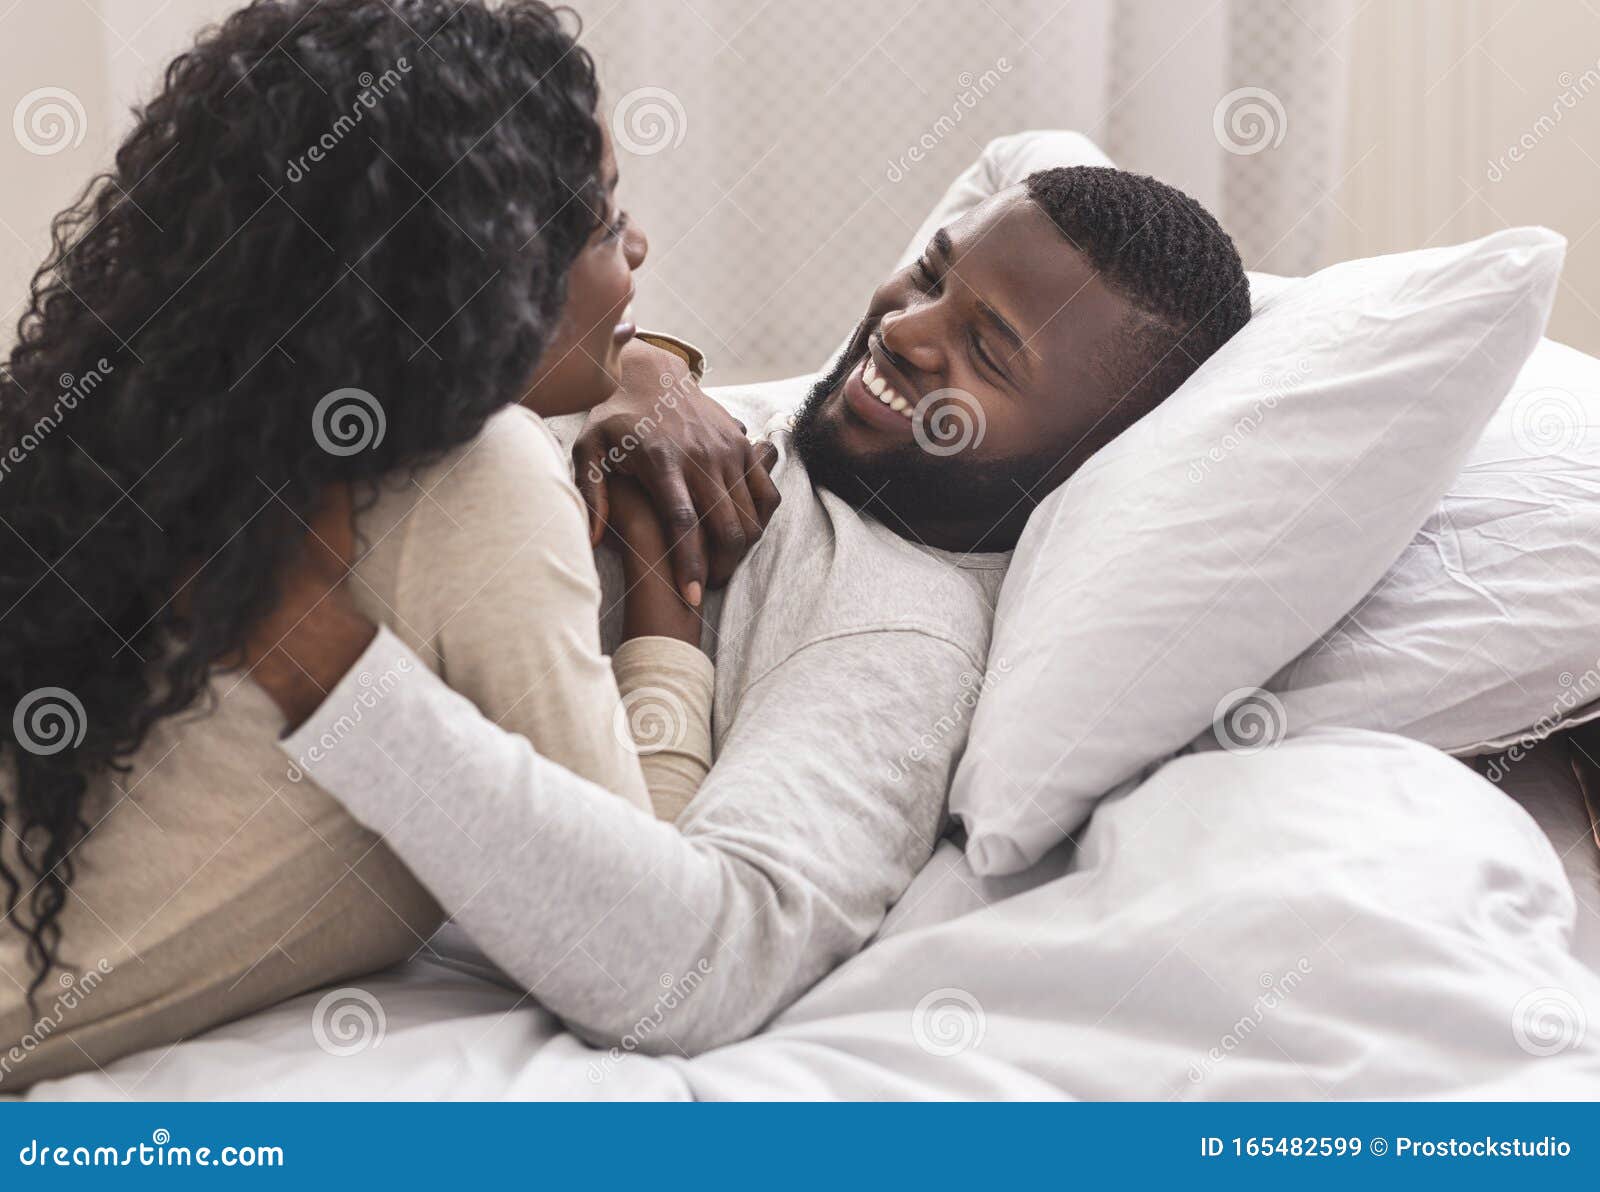 chase michael recommends pictures of interracial couples cuddling pic